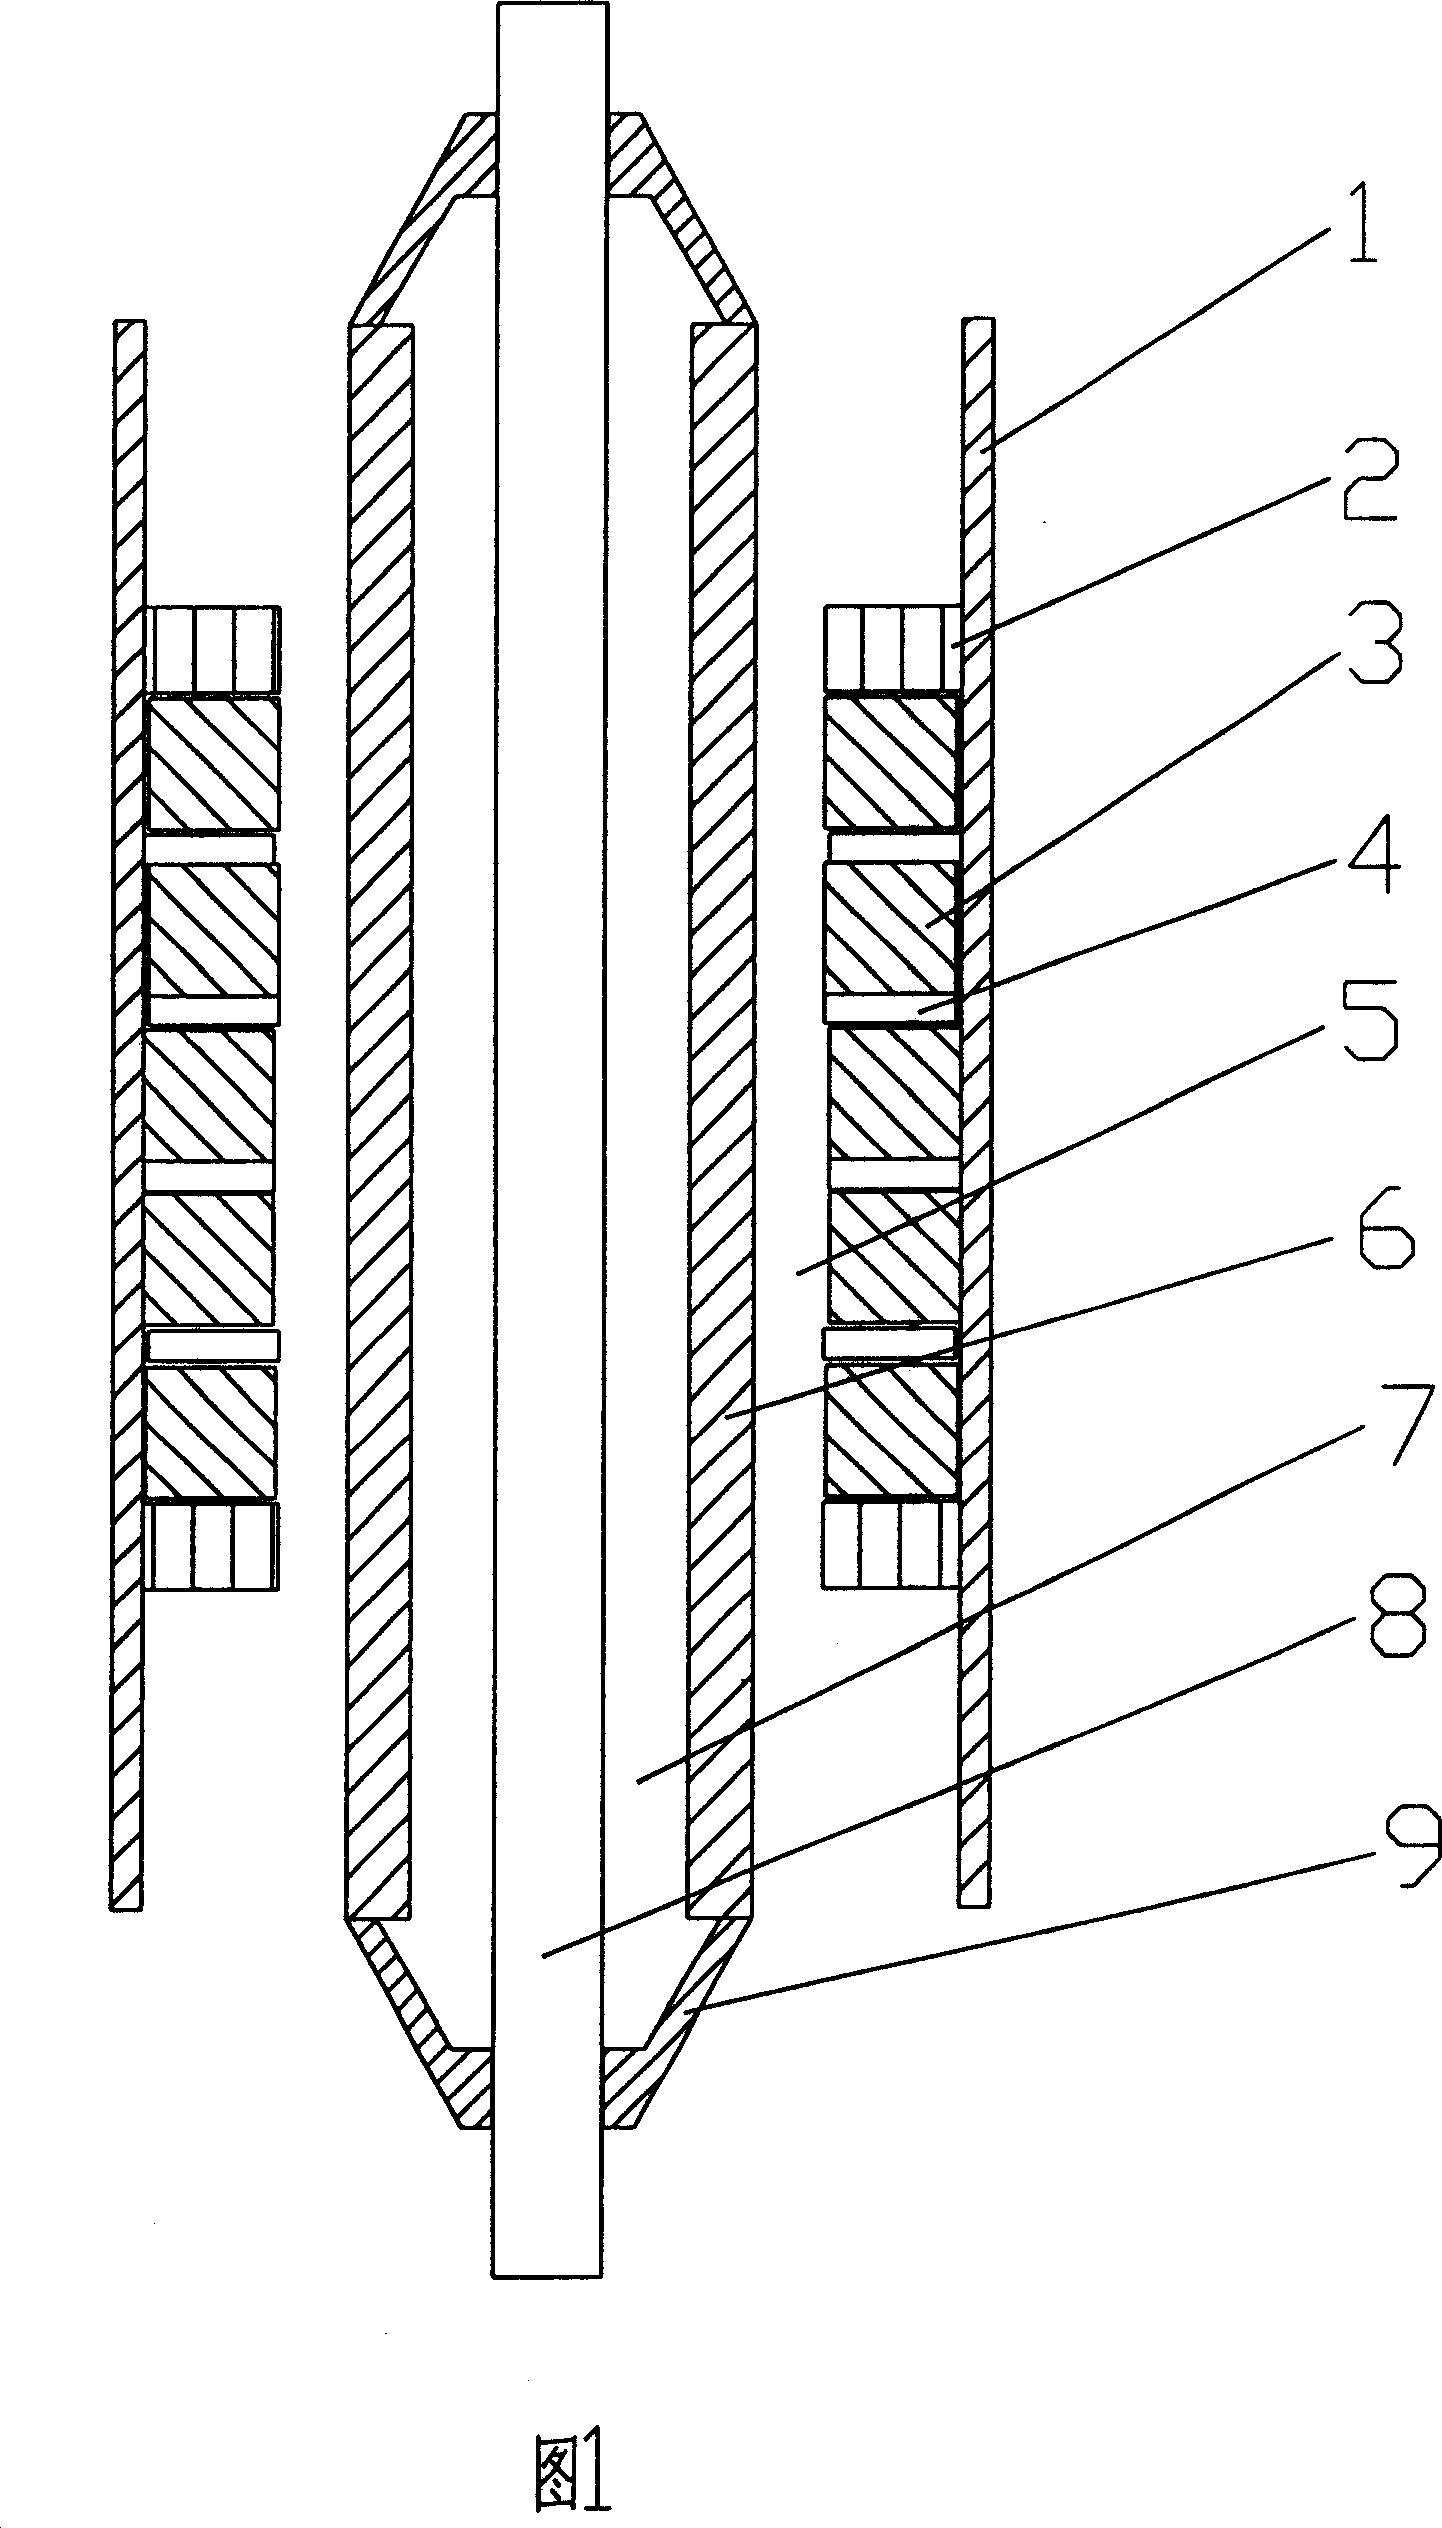 Magneto-thermo wax-proofing apparatus for oil exploitation